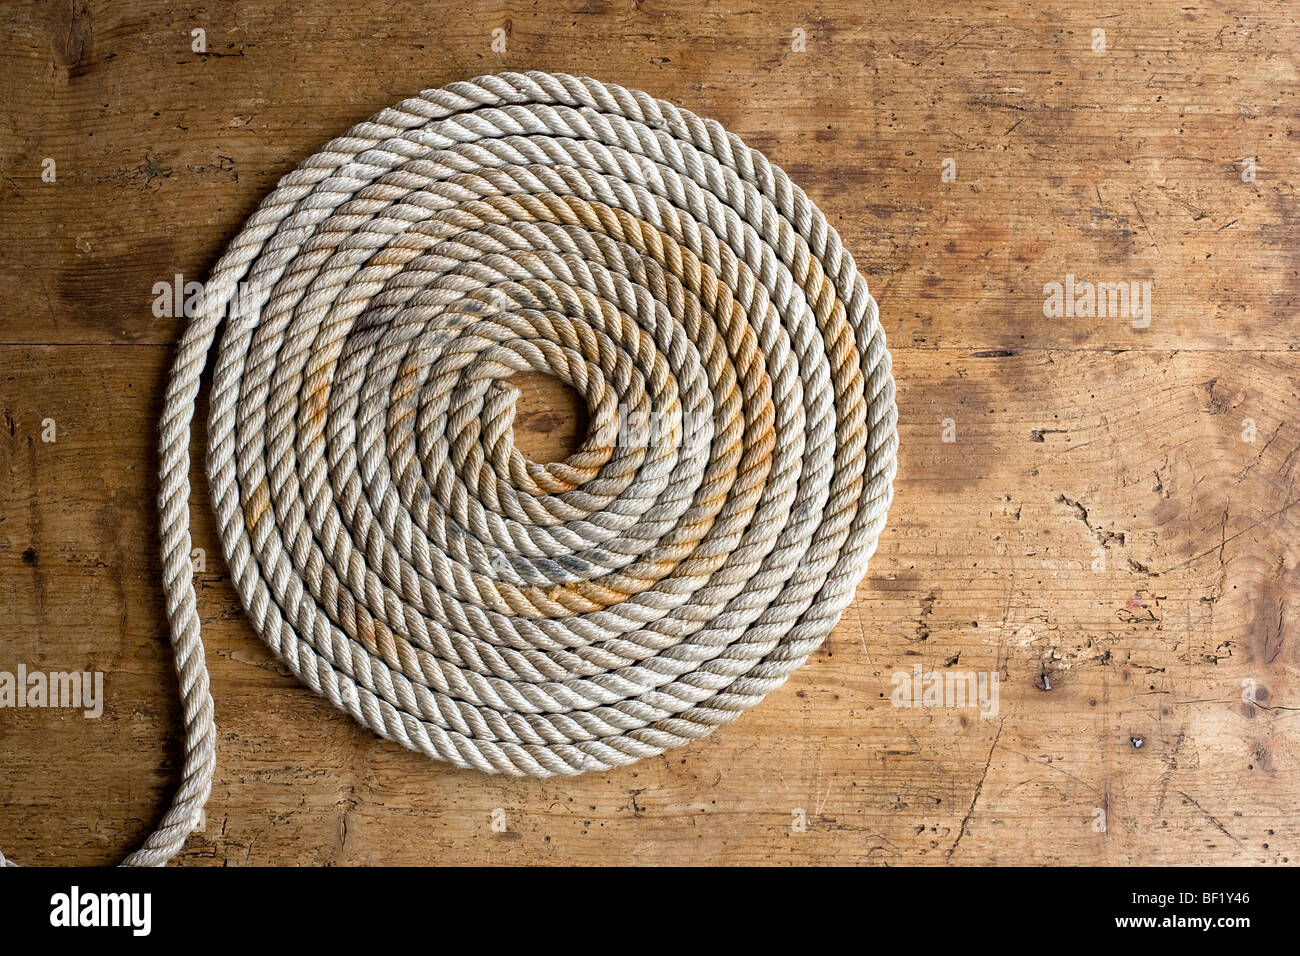 Rope coil on an antique seaman's chest Stock Photo